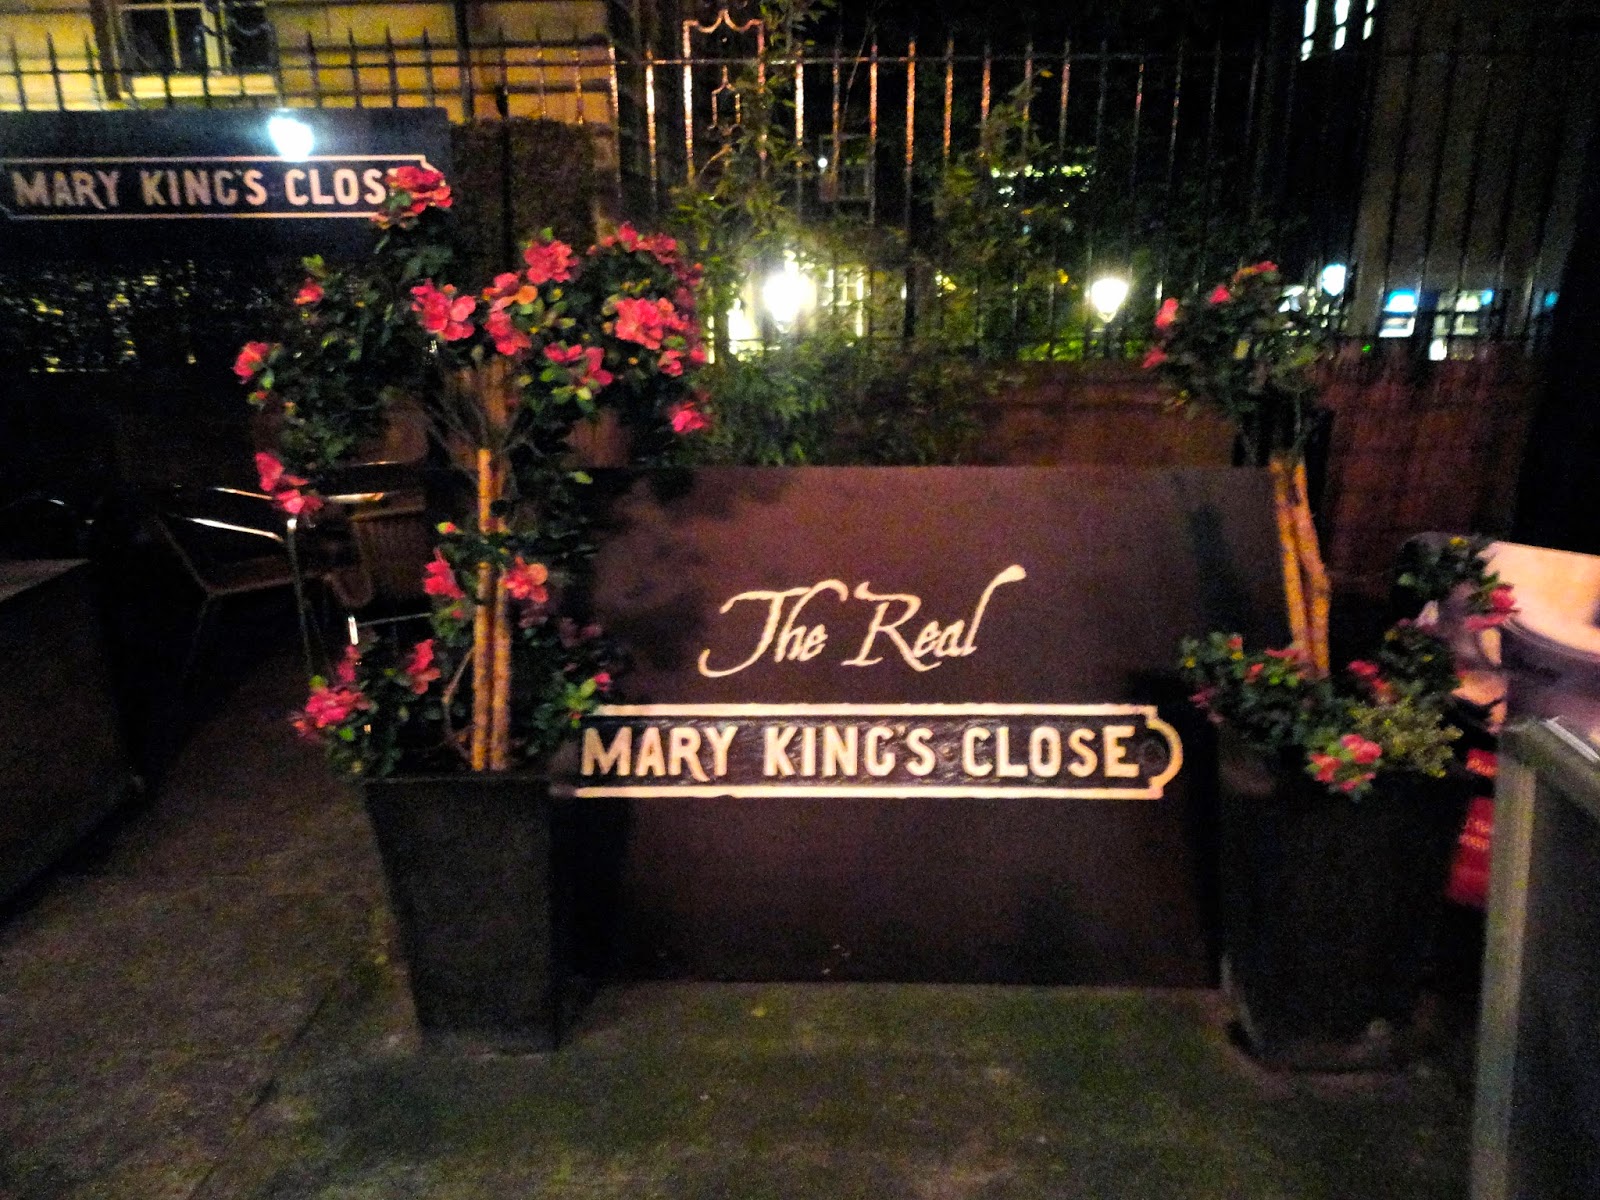 The Real Mary King's Close sign in Edinburgh